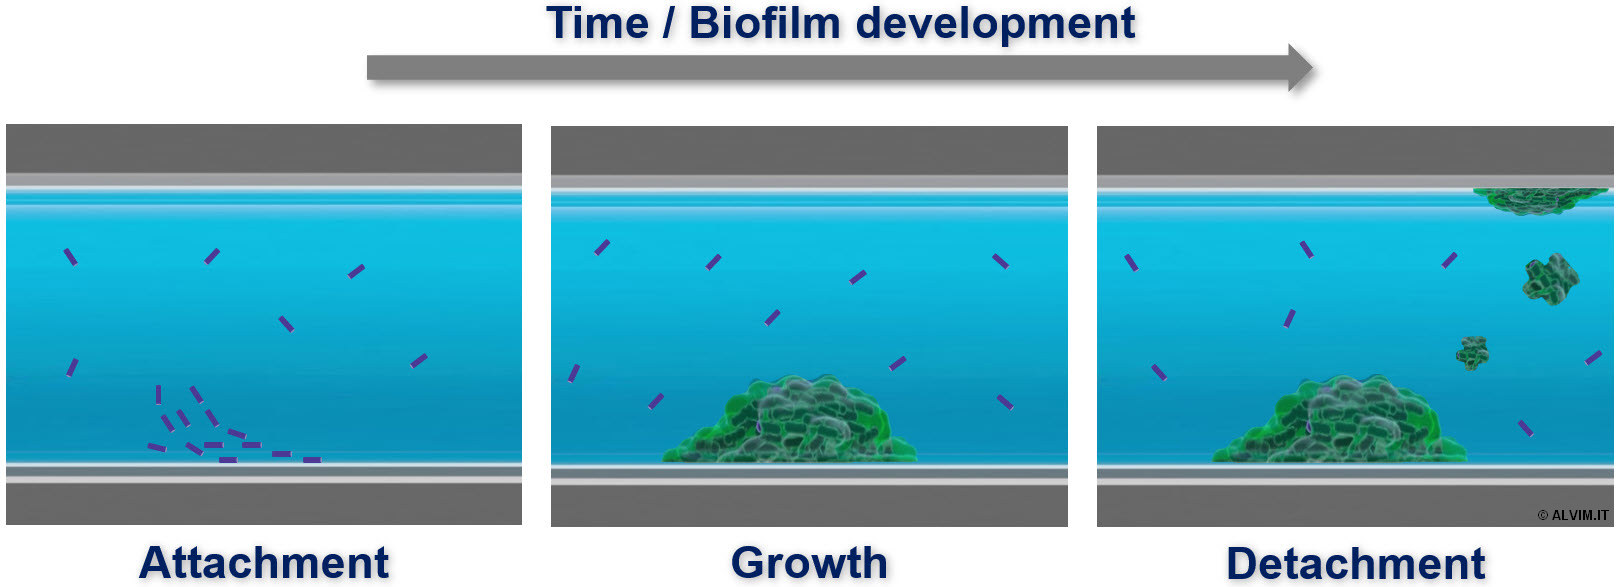 Formation and development of biofilm with time